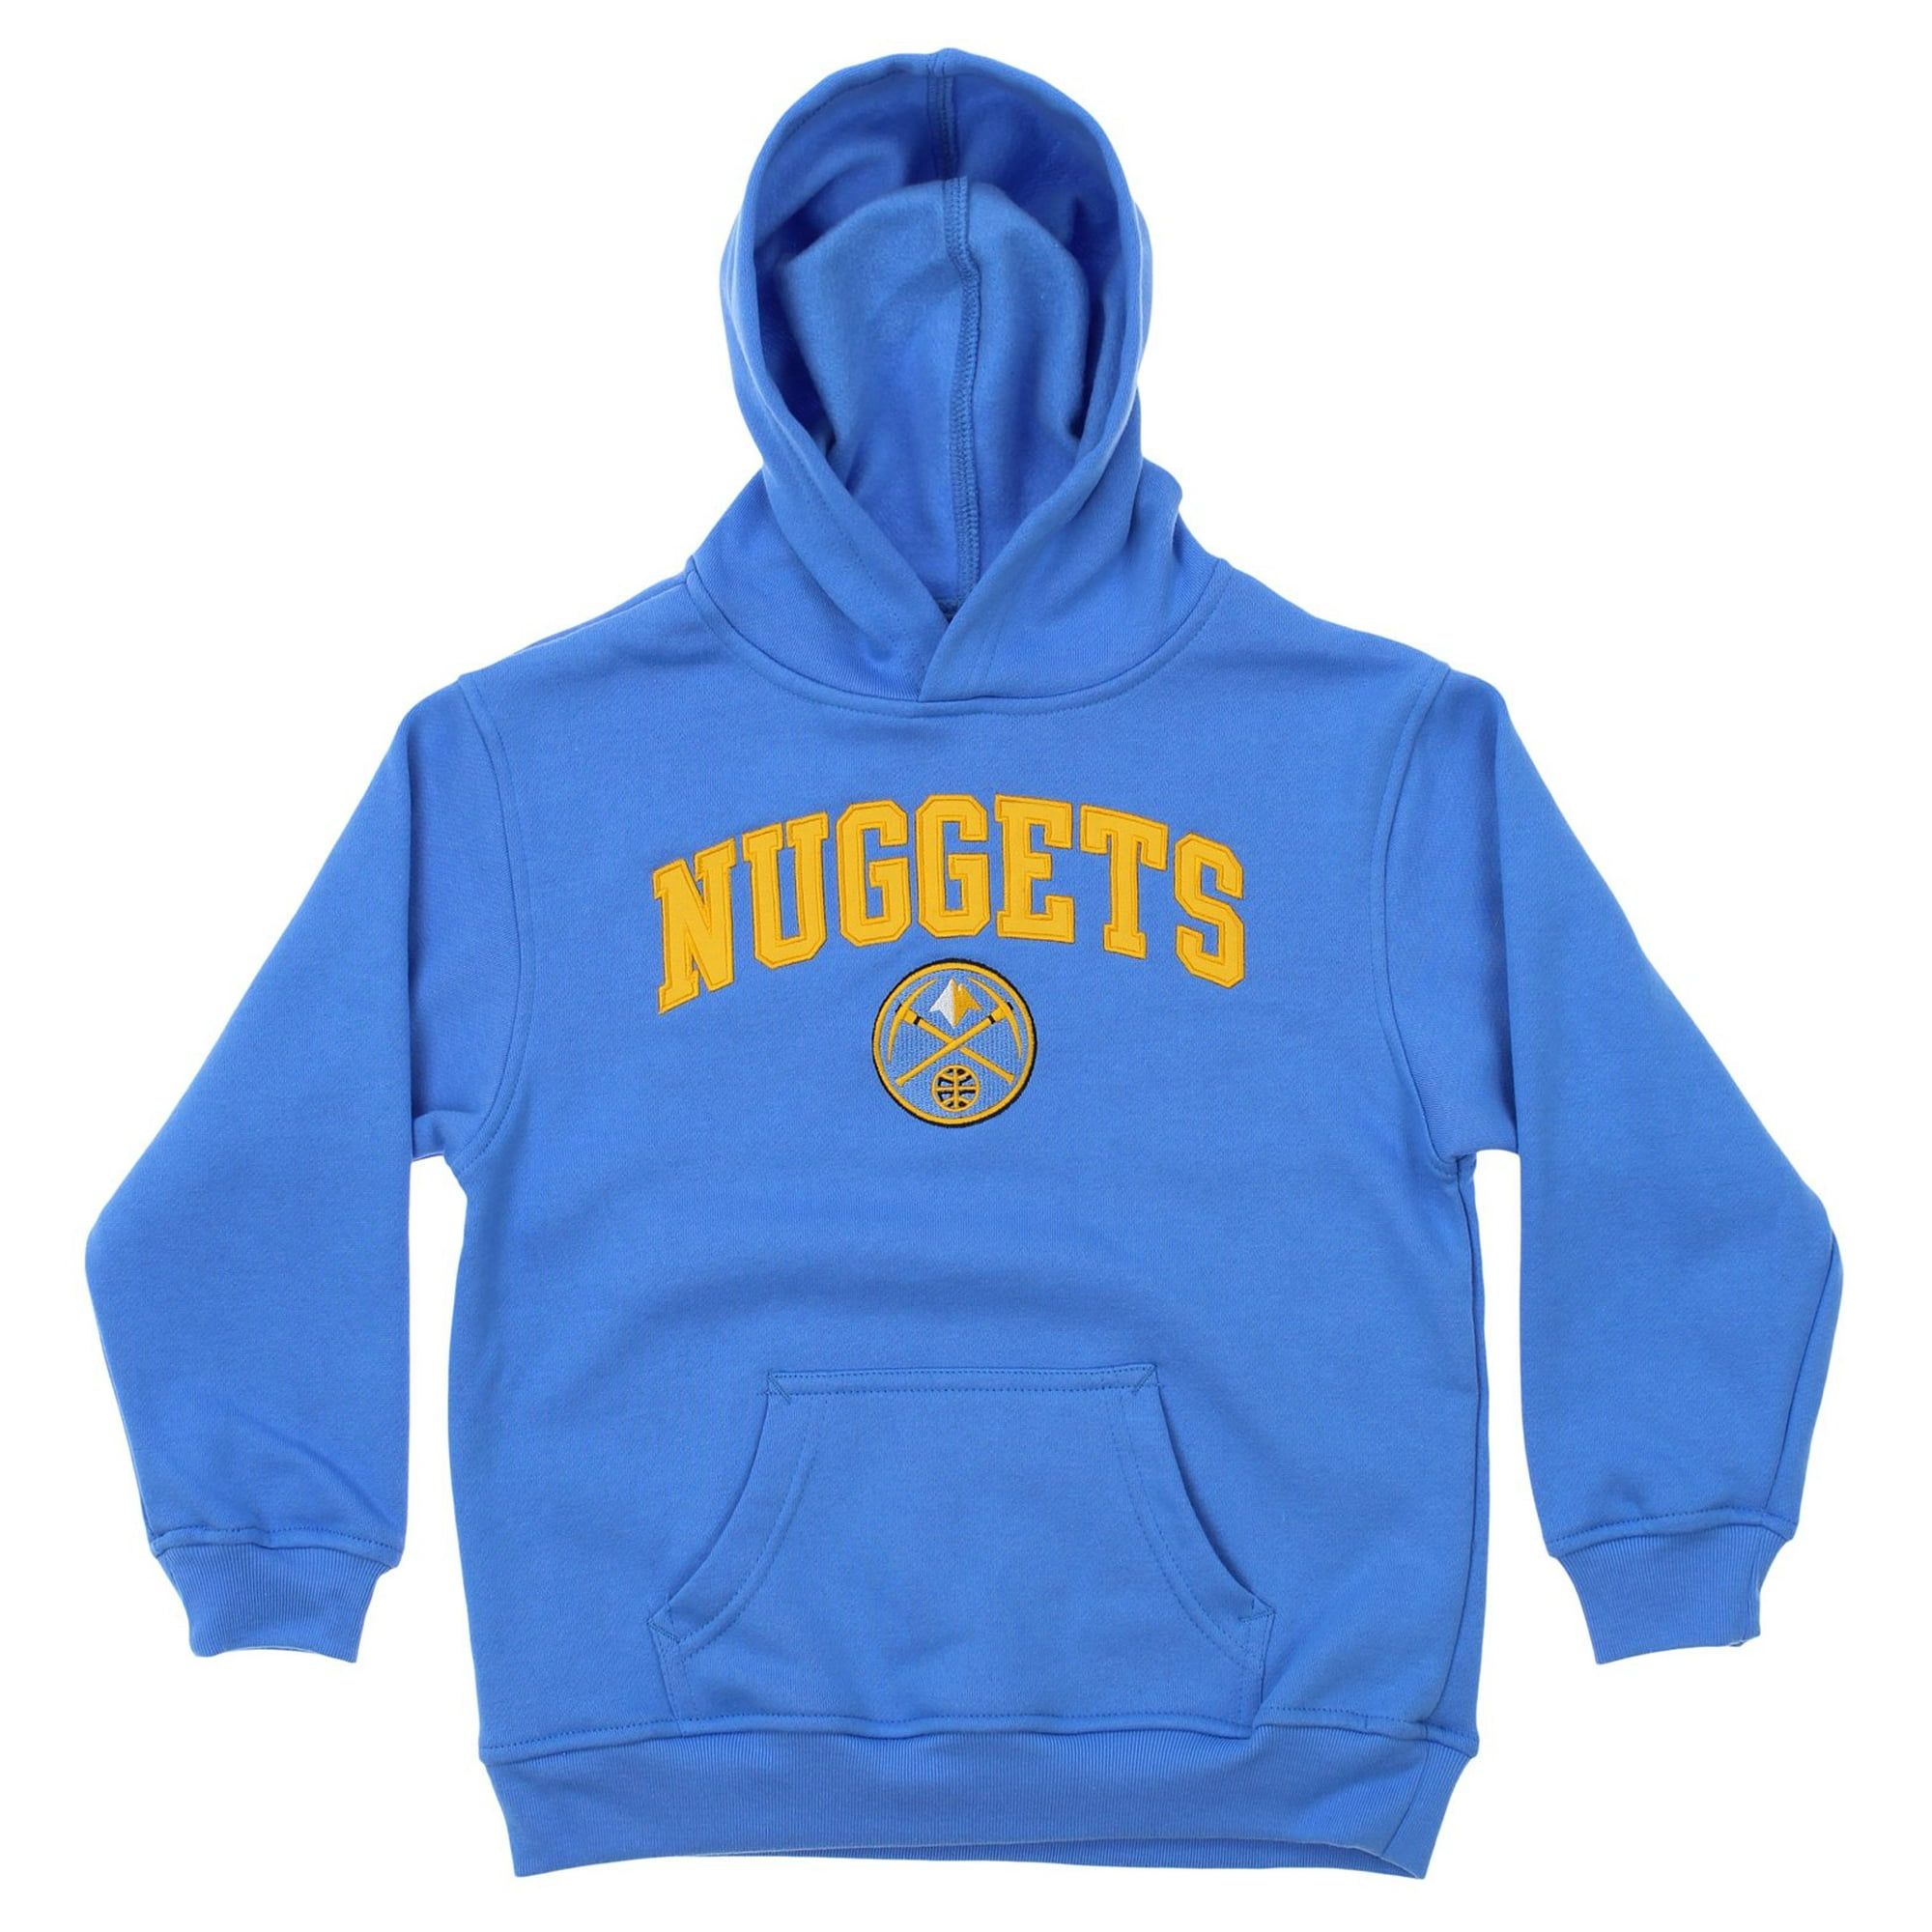 OuterStuff NBA Youth Denver Nuggets Fleece Pullover Hoodie, Blue 